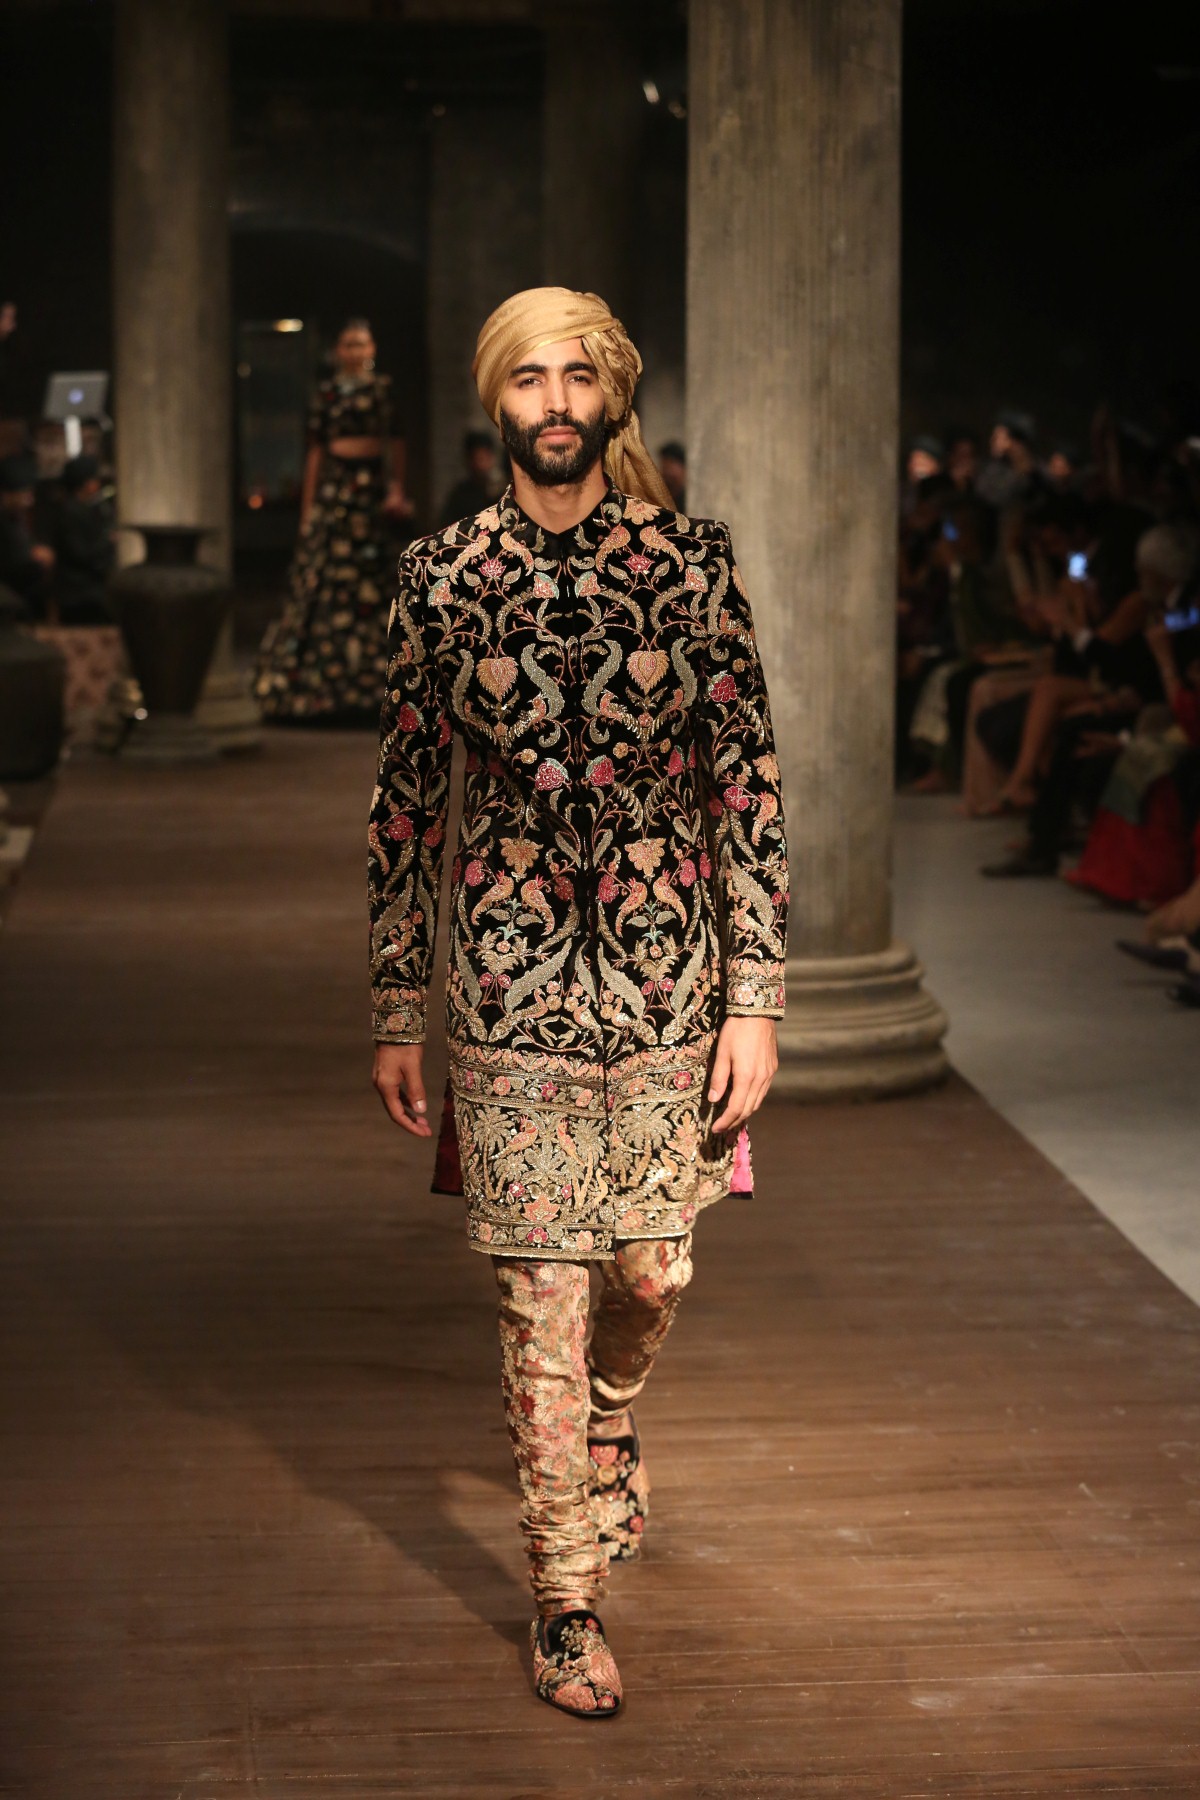 fwd-life-sabyasachi-and-christian-louboutin-ramp-images-for-the-firdaus-collection-and-bespoke-shoes-and-handbags-15